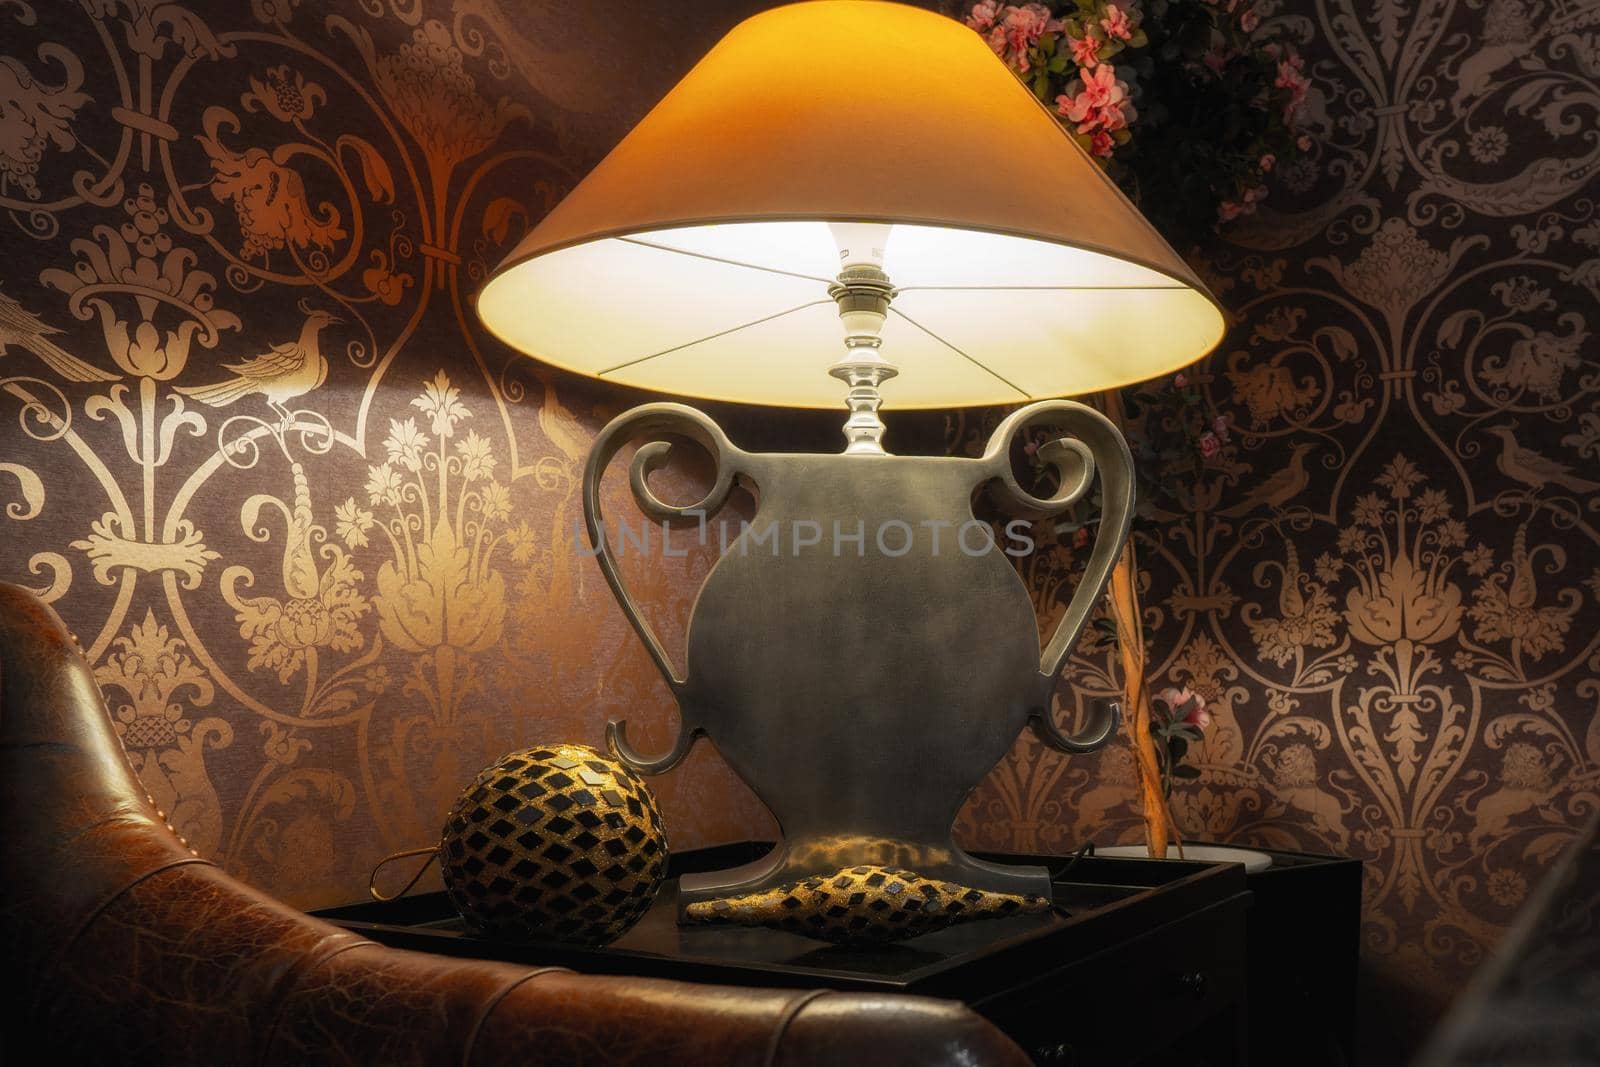 Yellow Shade, Silver Foot Lamp in Vintage Environment with Leather Sofa in Front